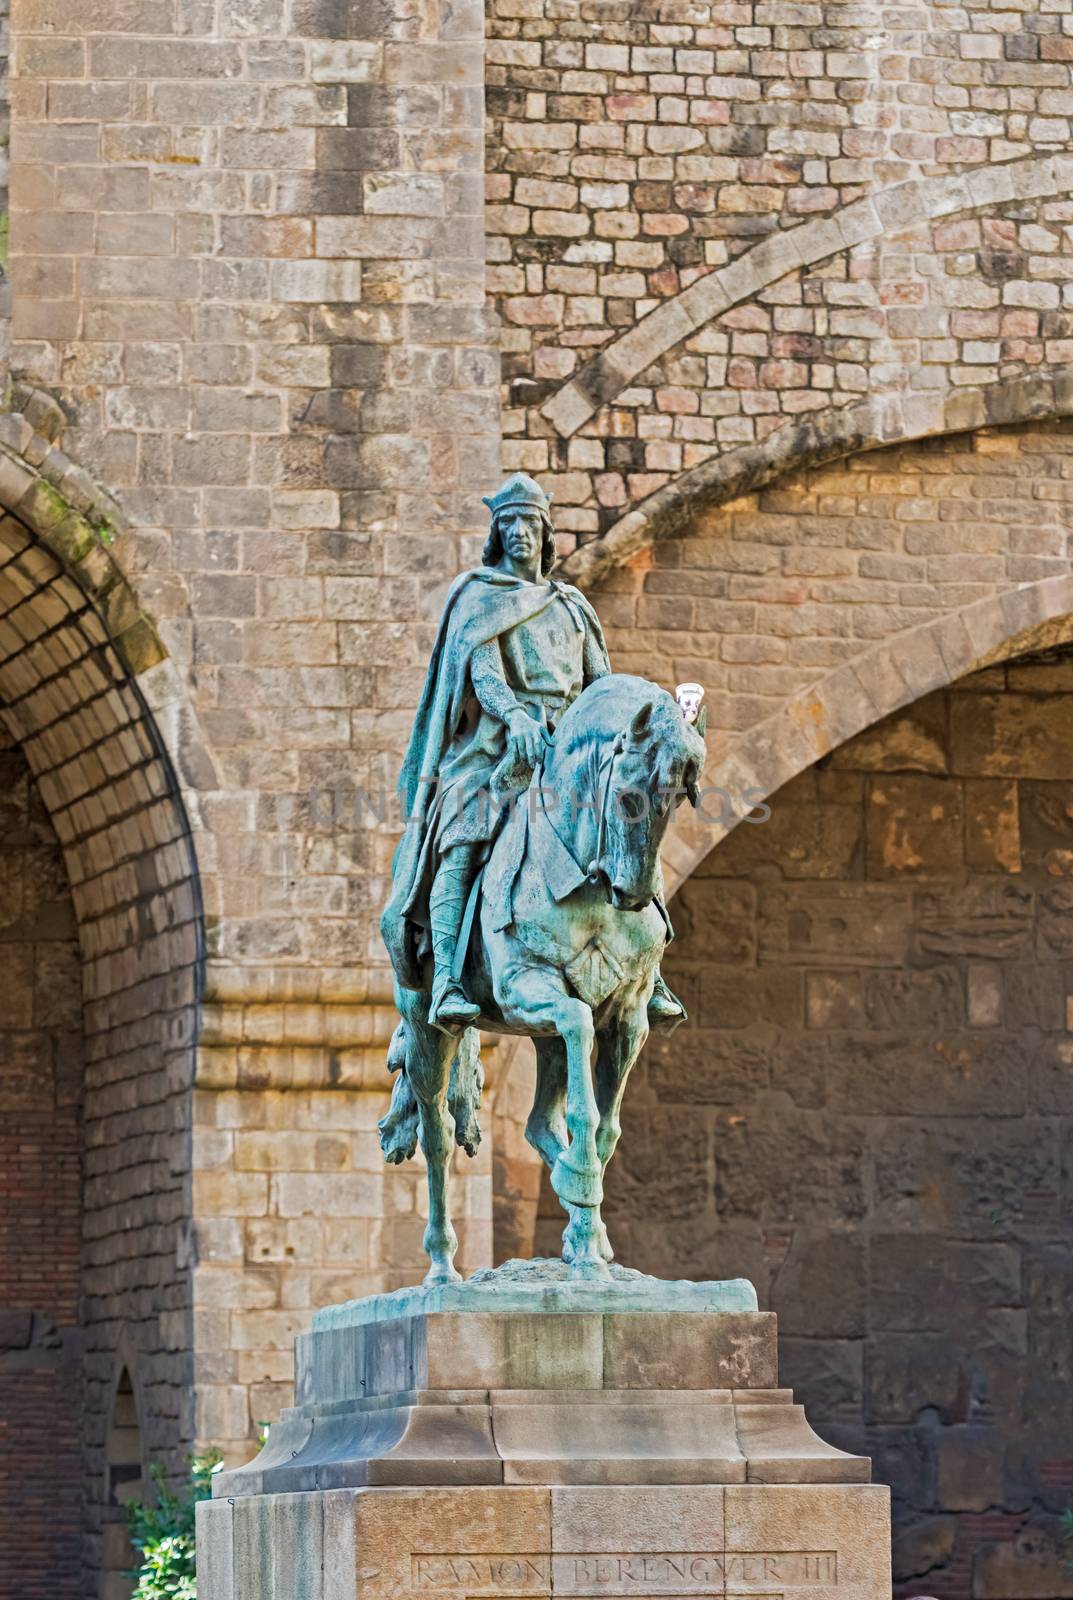 Monument of Ramon Berenguer III the Great in Barcelona, Spain. He was the count of Barcelona, Girona, and Ausona from 1086, Besal�� from 1111, Cerdanya from 1117, and Provence, in the Holy Roman Empire, from 1112, all until his death in Barcelona in 1131